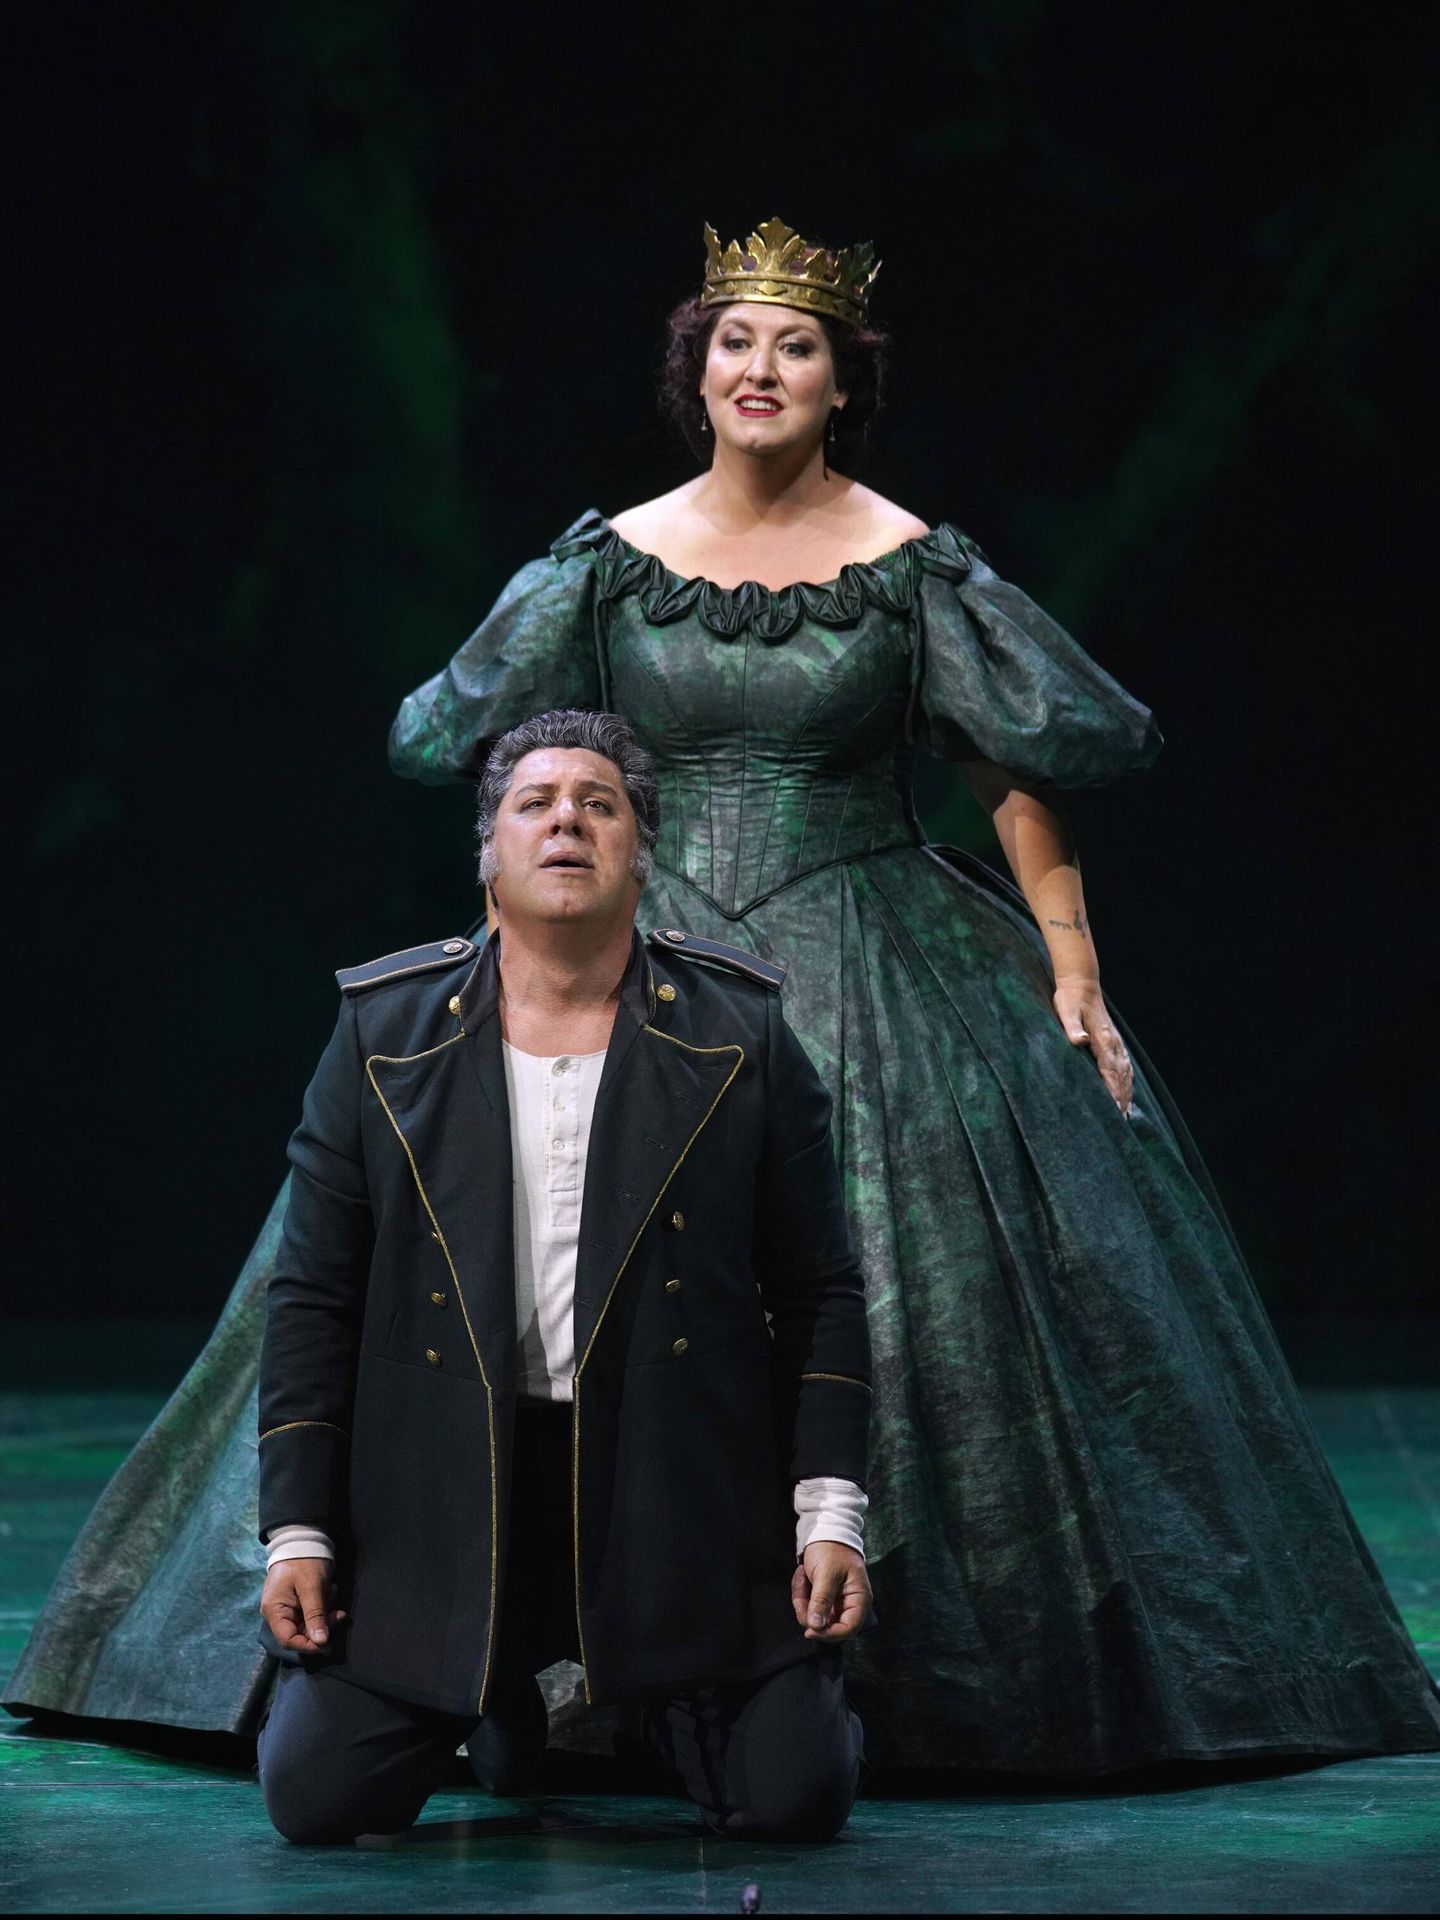 Luca Salsi (Nabucco) y Anna Pirozzi (Abigaille). (Teatro Real/Javier del Real)